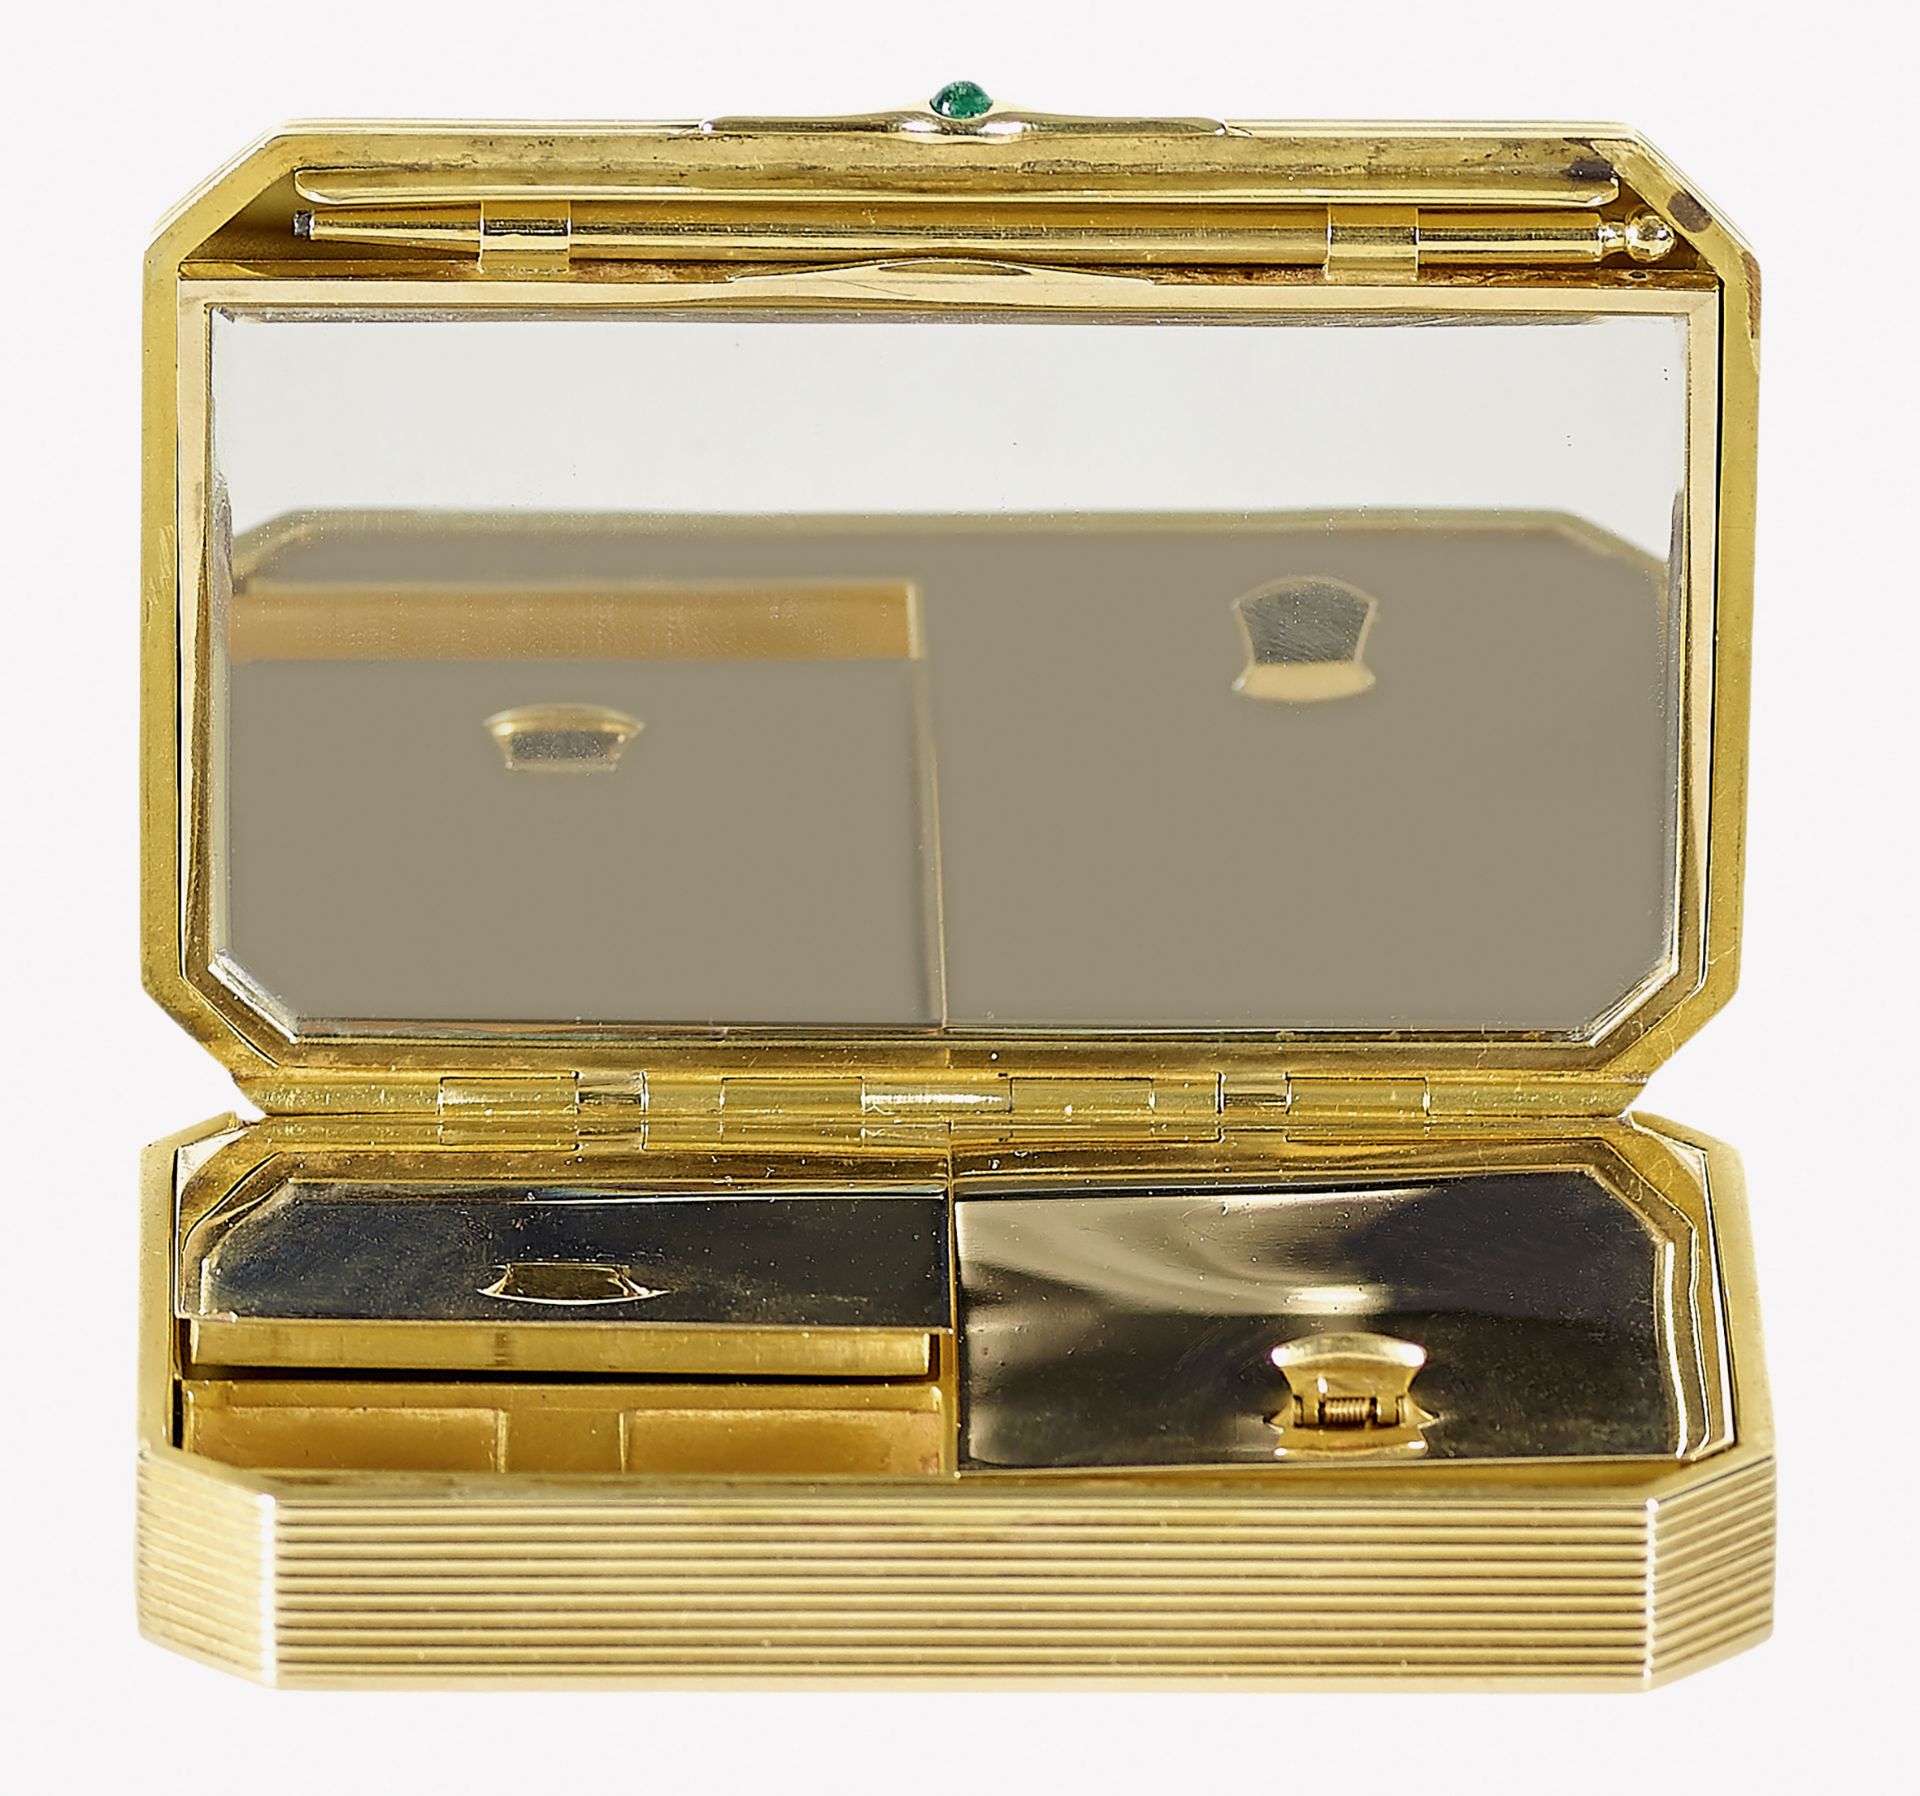 MINAUDIERE: Cartier. - Image 2 of 2